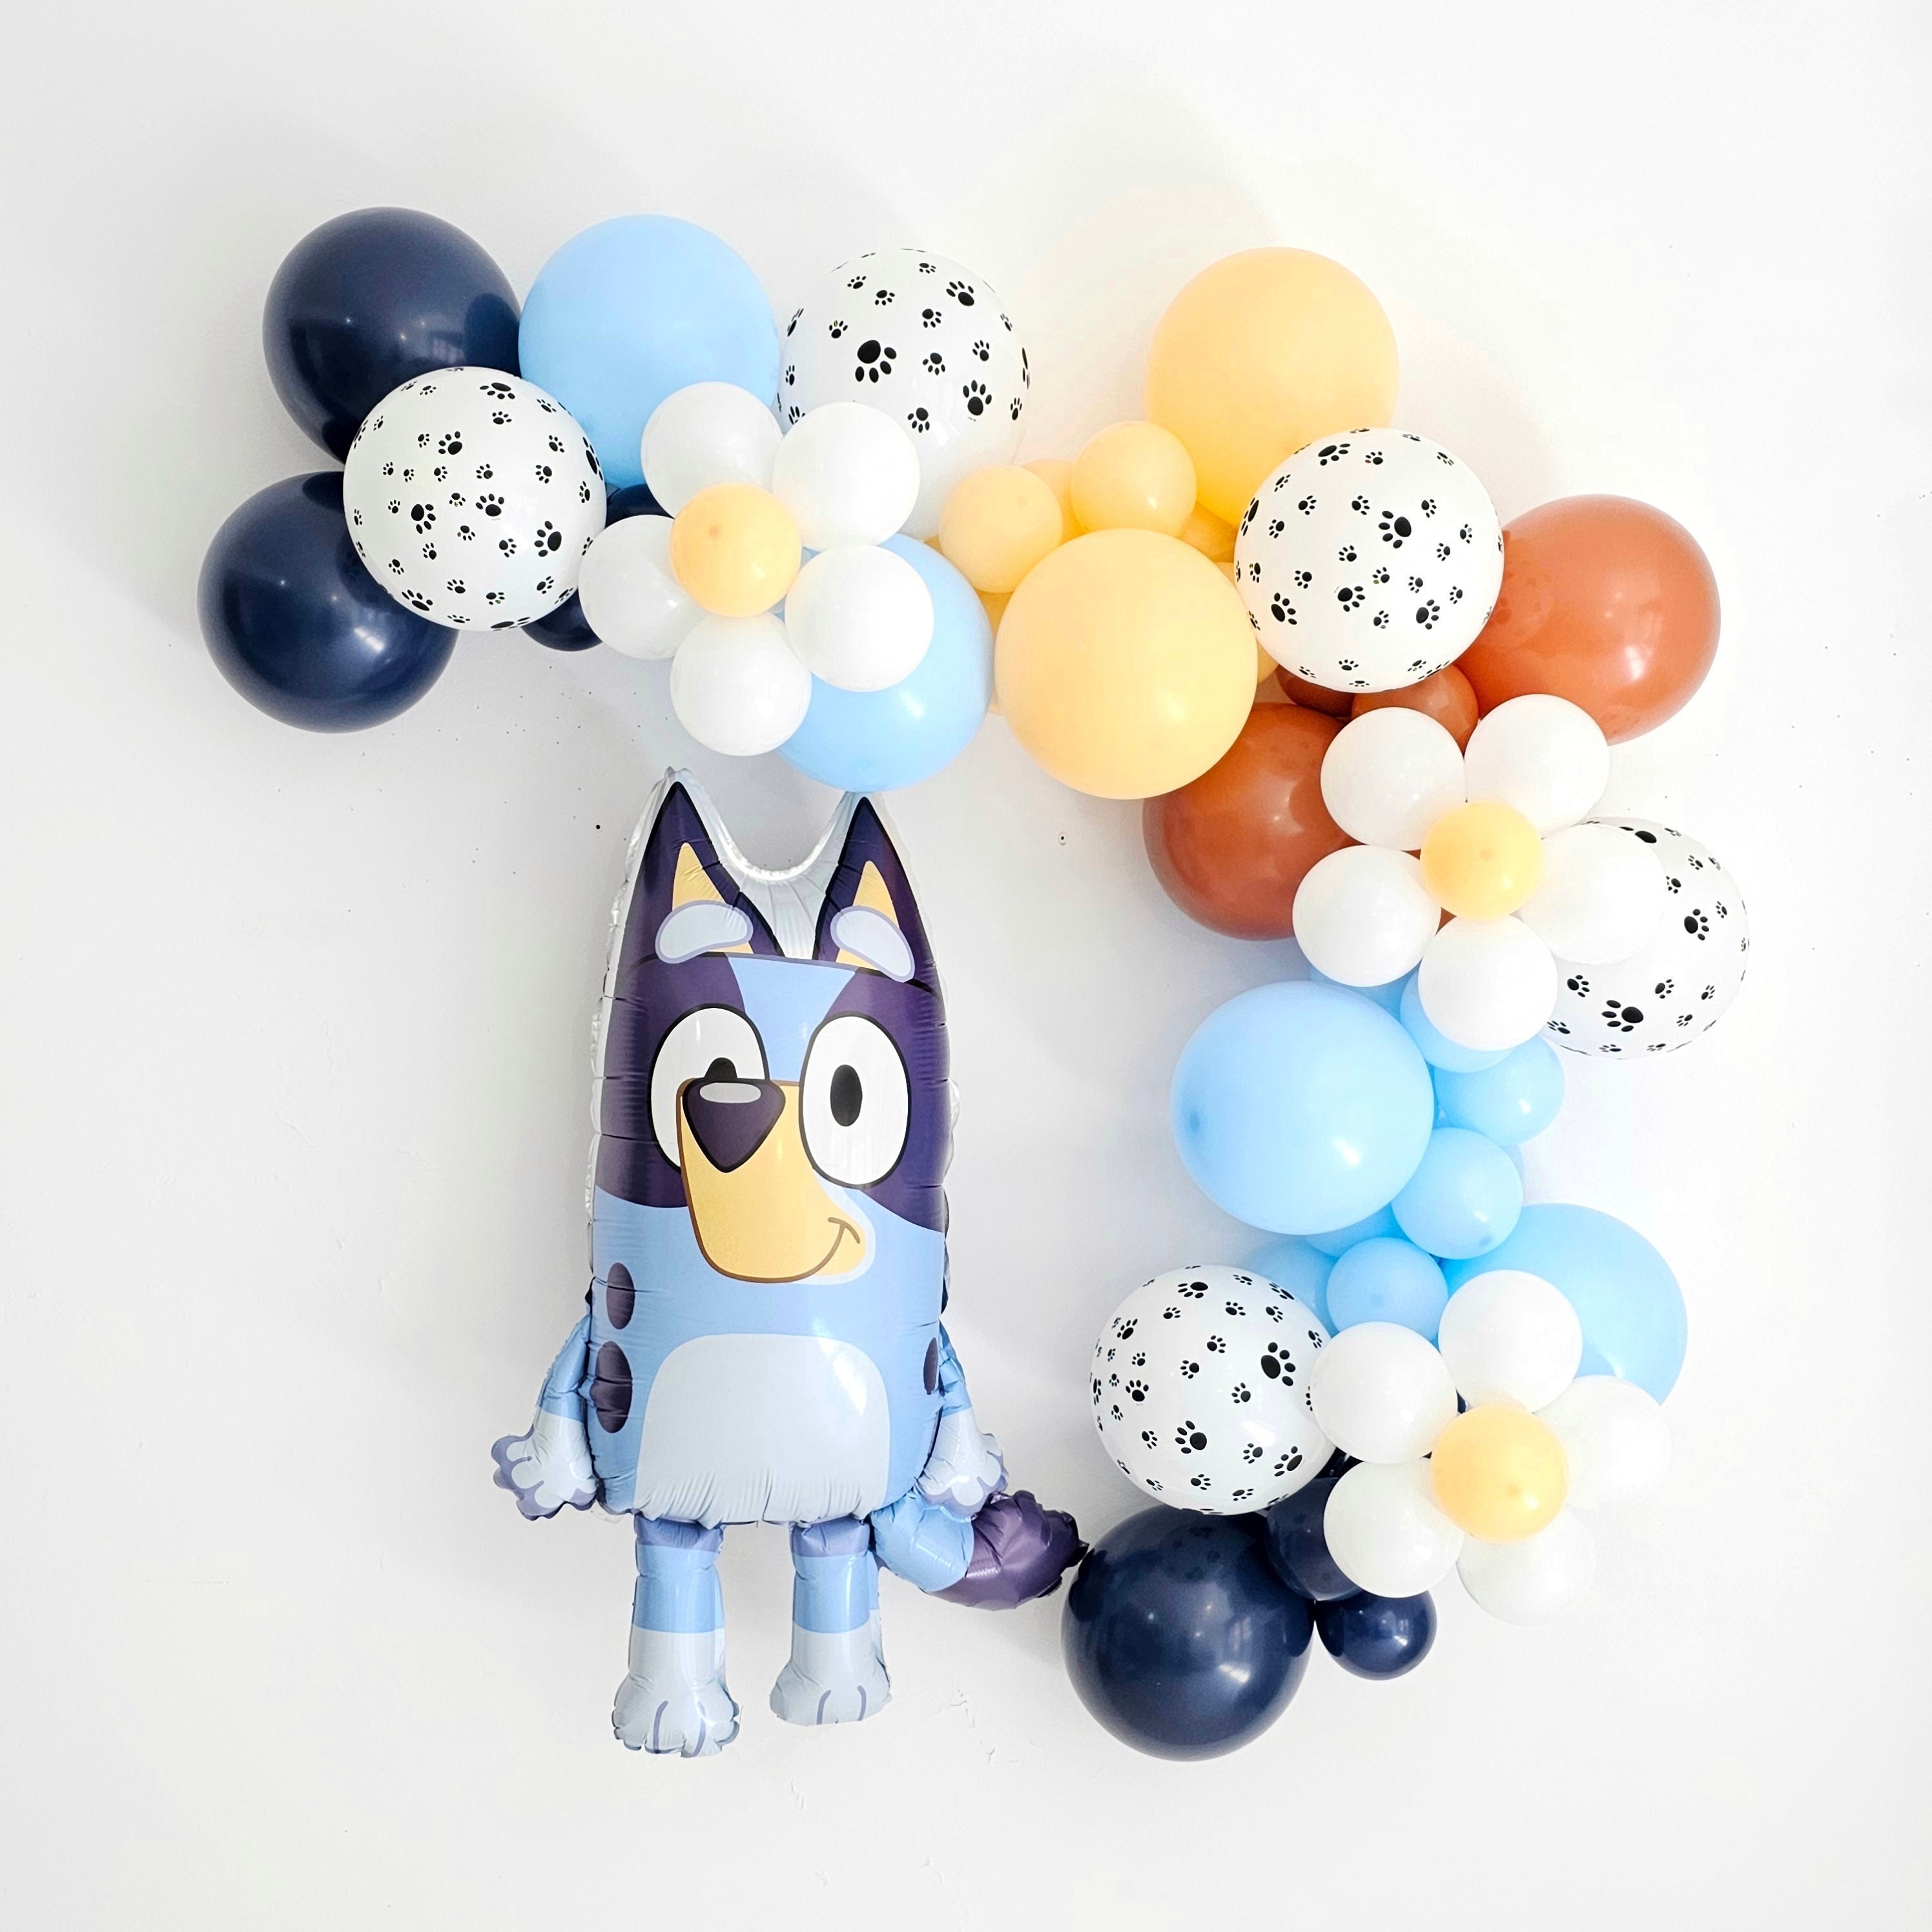 Make Your Own Bluey And Bingo Balloons At Home  2nd birthday party themes,  6th birthday parties, Birthday party themes